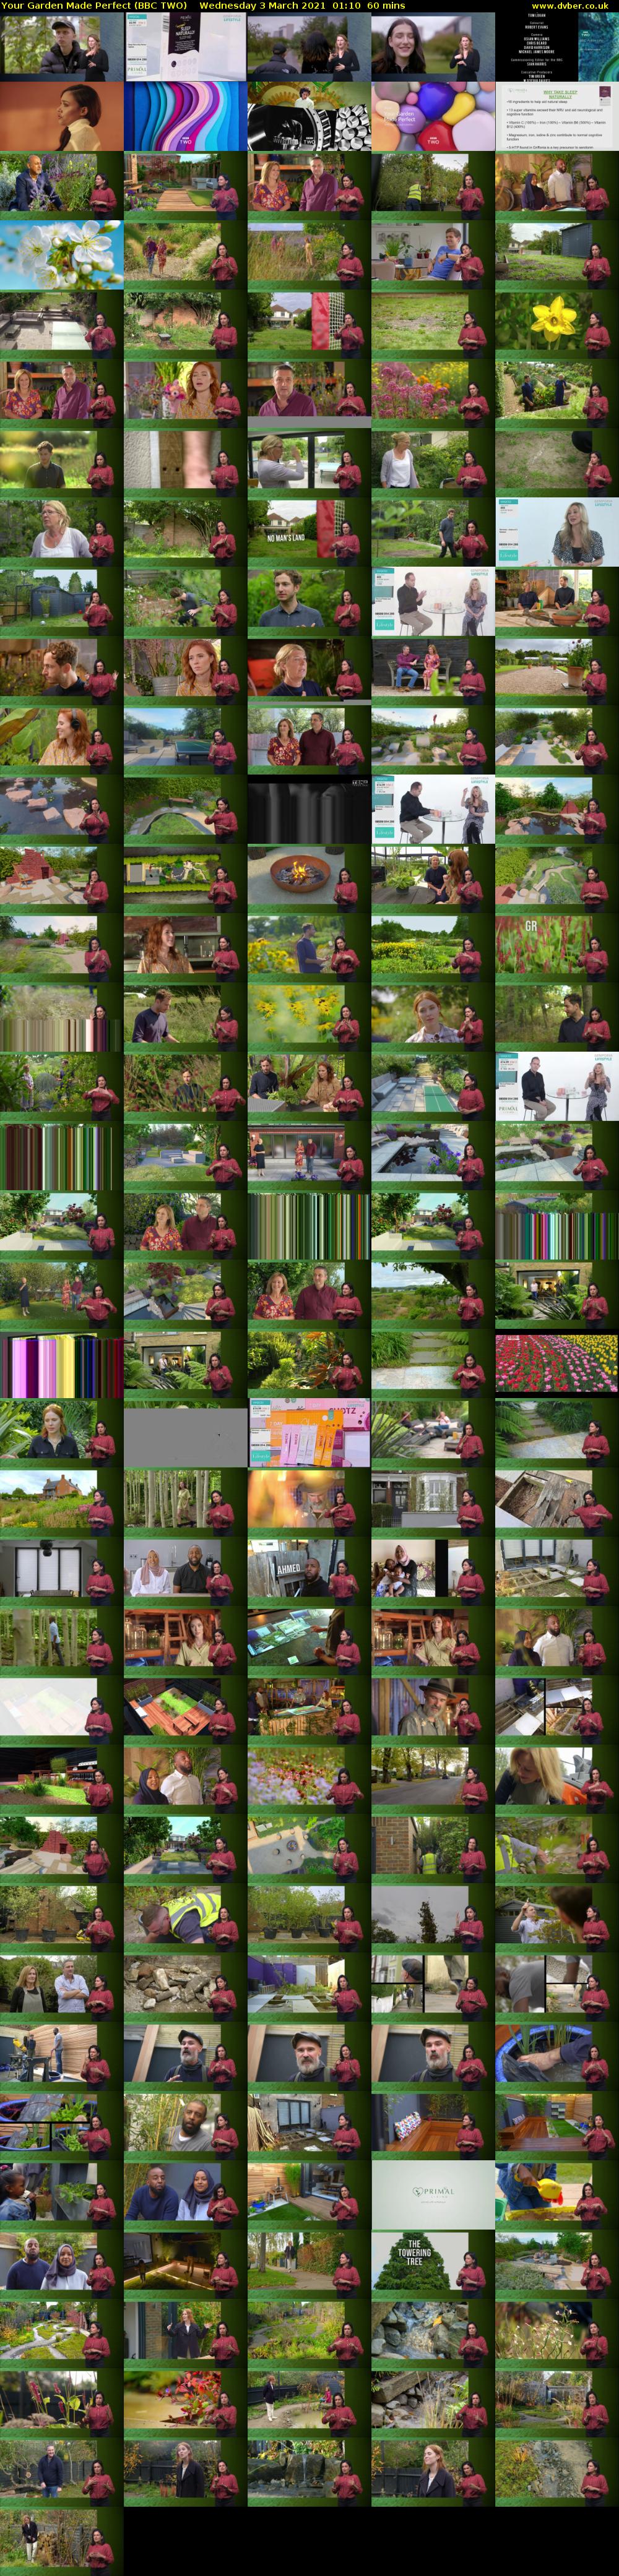 Your Garden Made Perfect (BBC TWO) Wednesday 3 March 2021 01:10 - 02:10